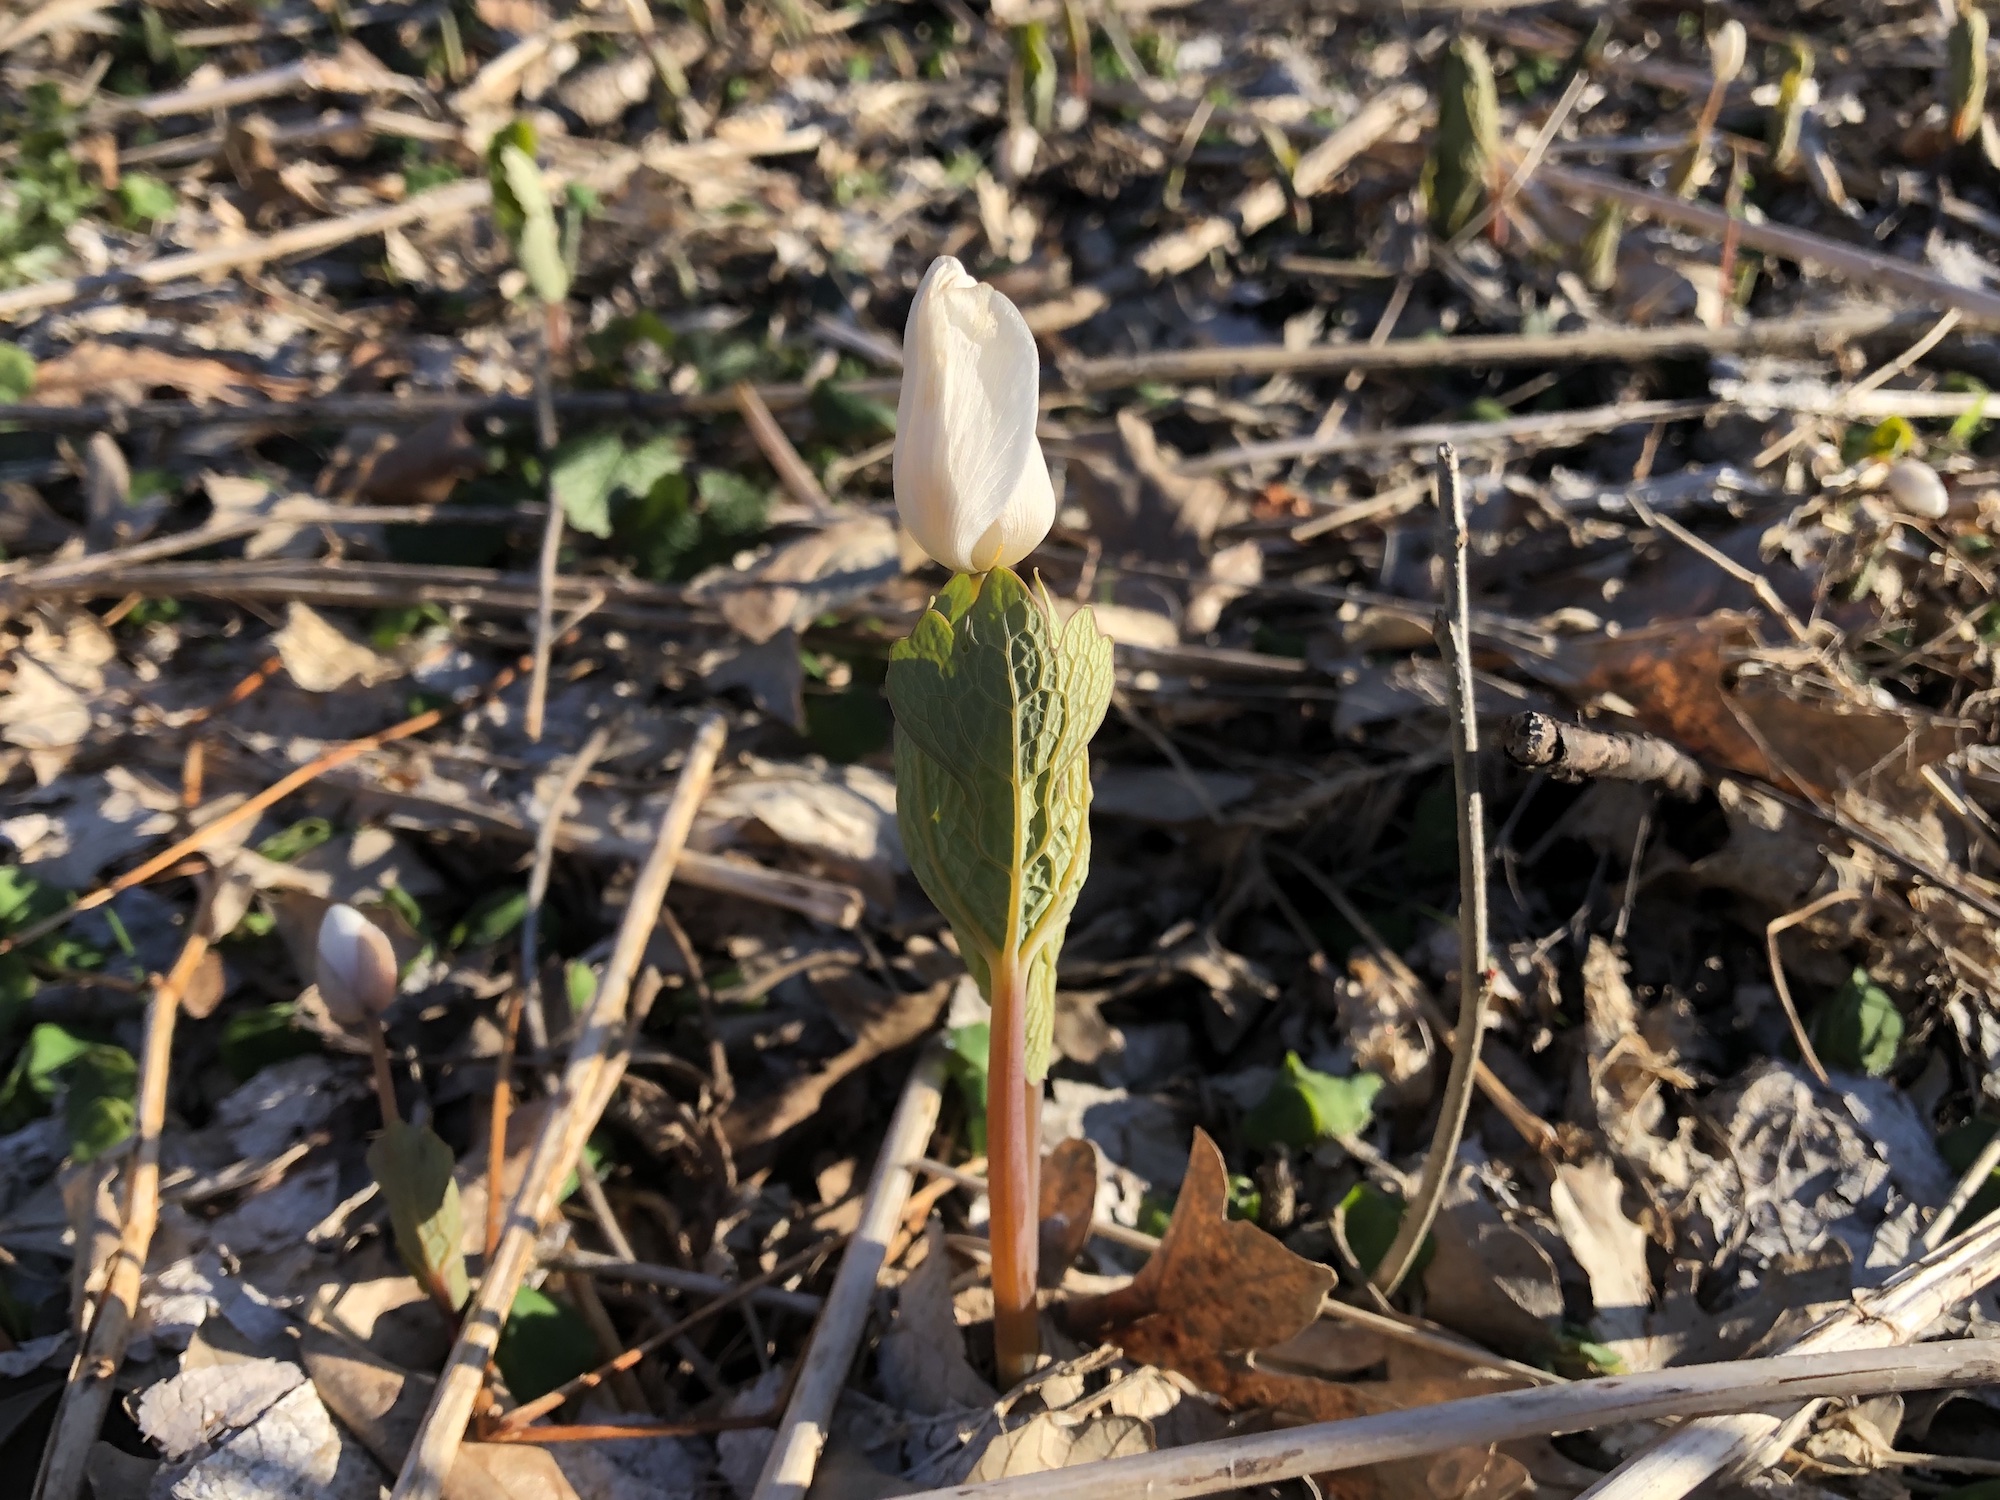 Bloodroot in Oak Savanna by Council Ring in Madison, Wisconsin on April 16, 2020.